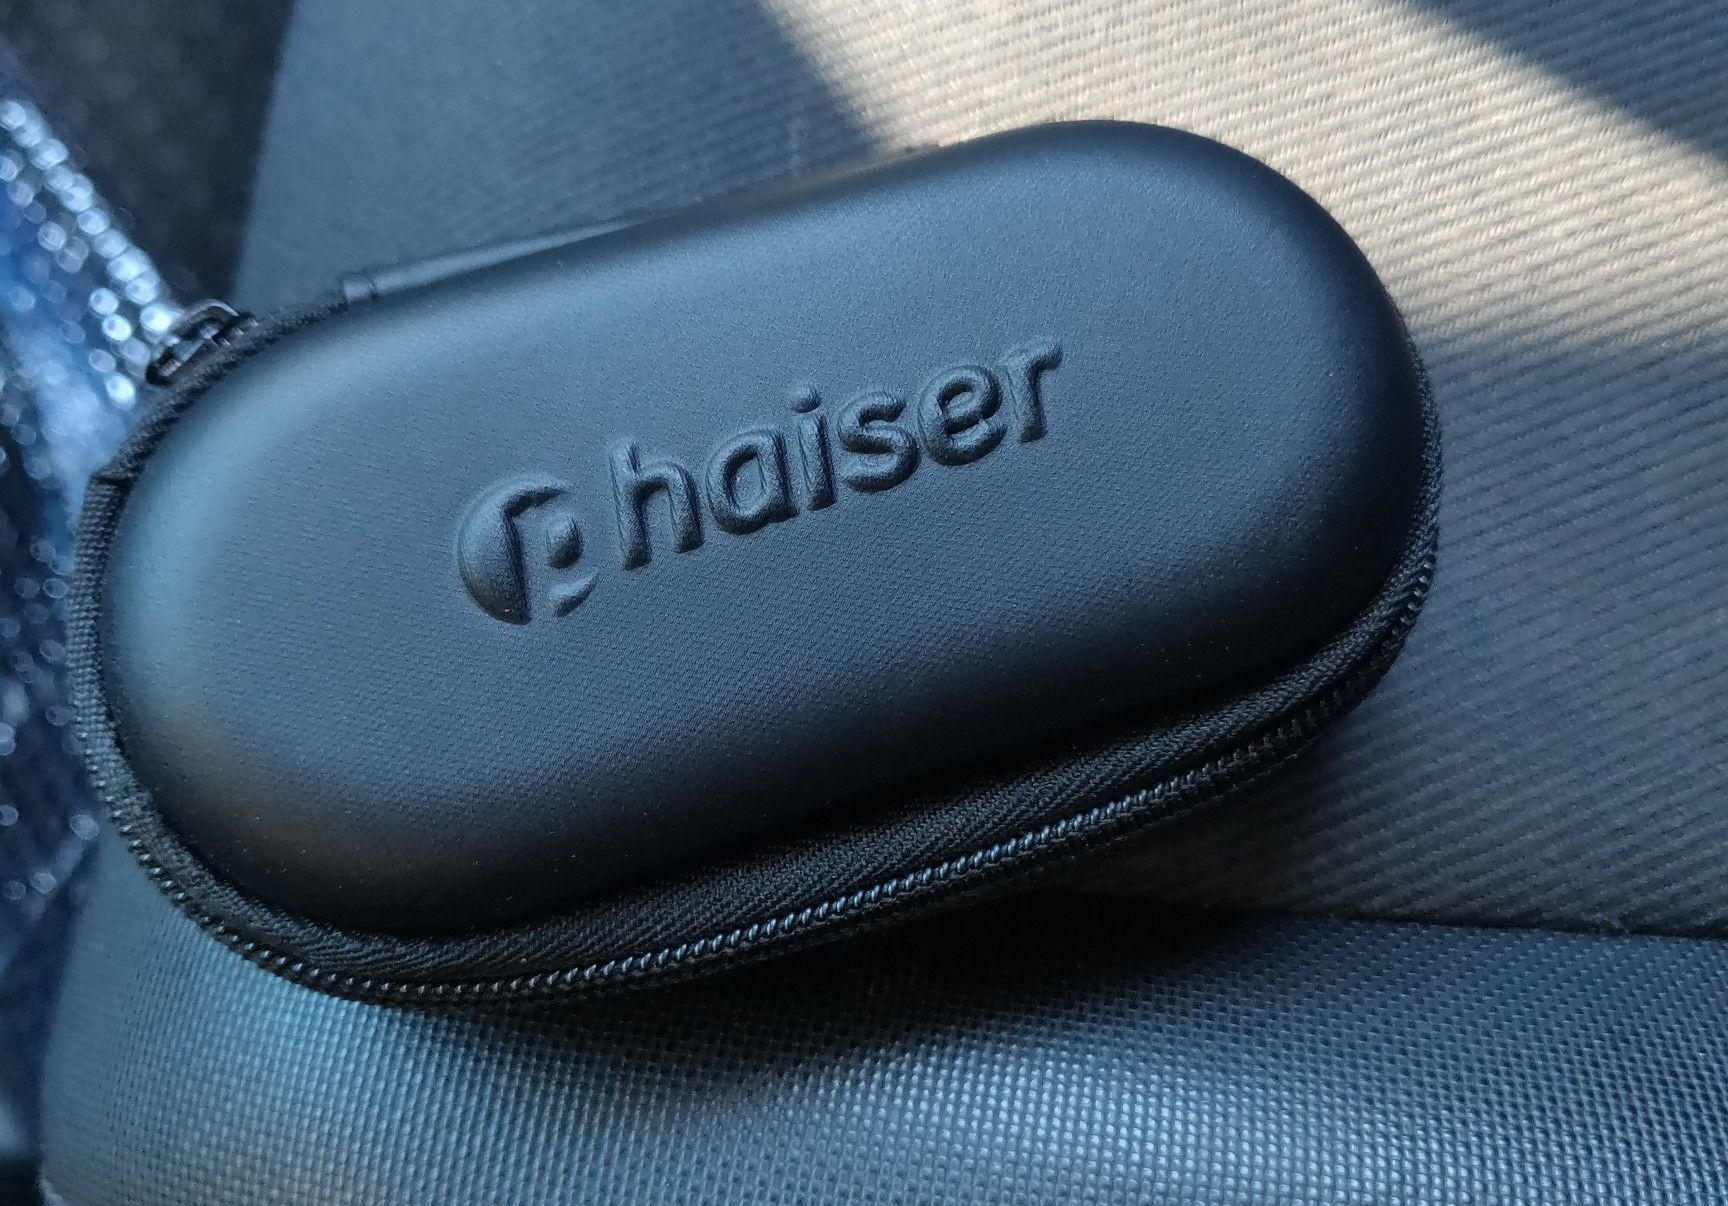 Earbuds case